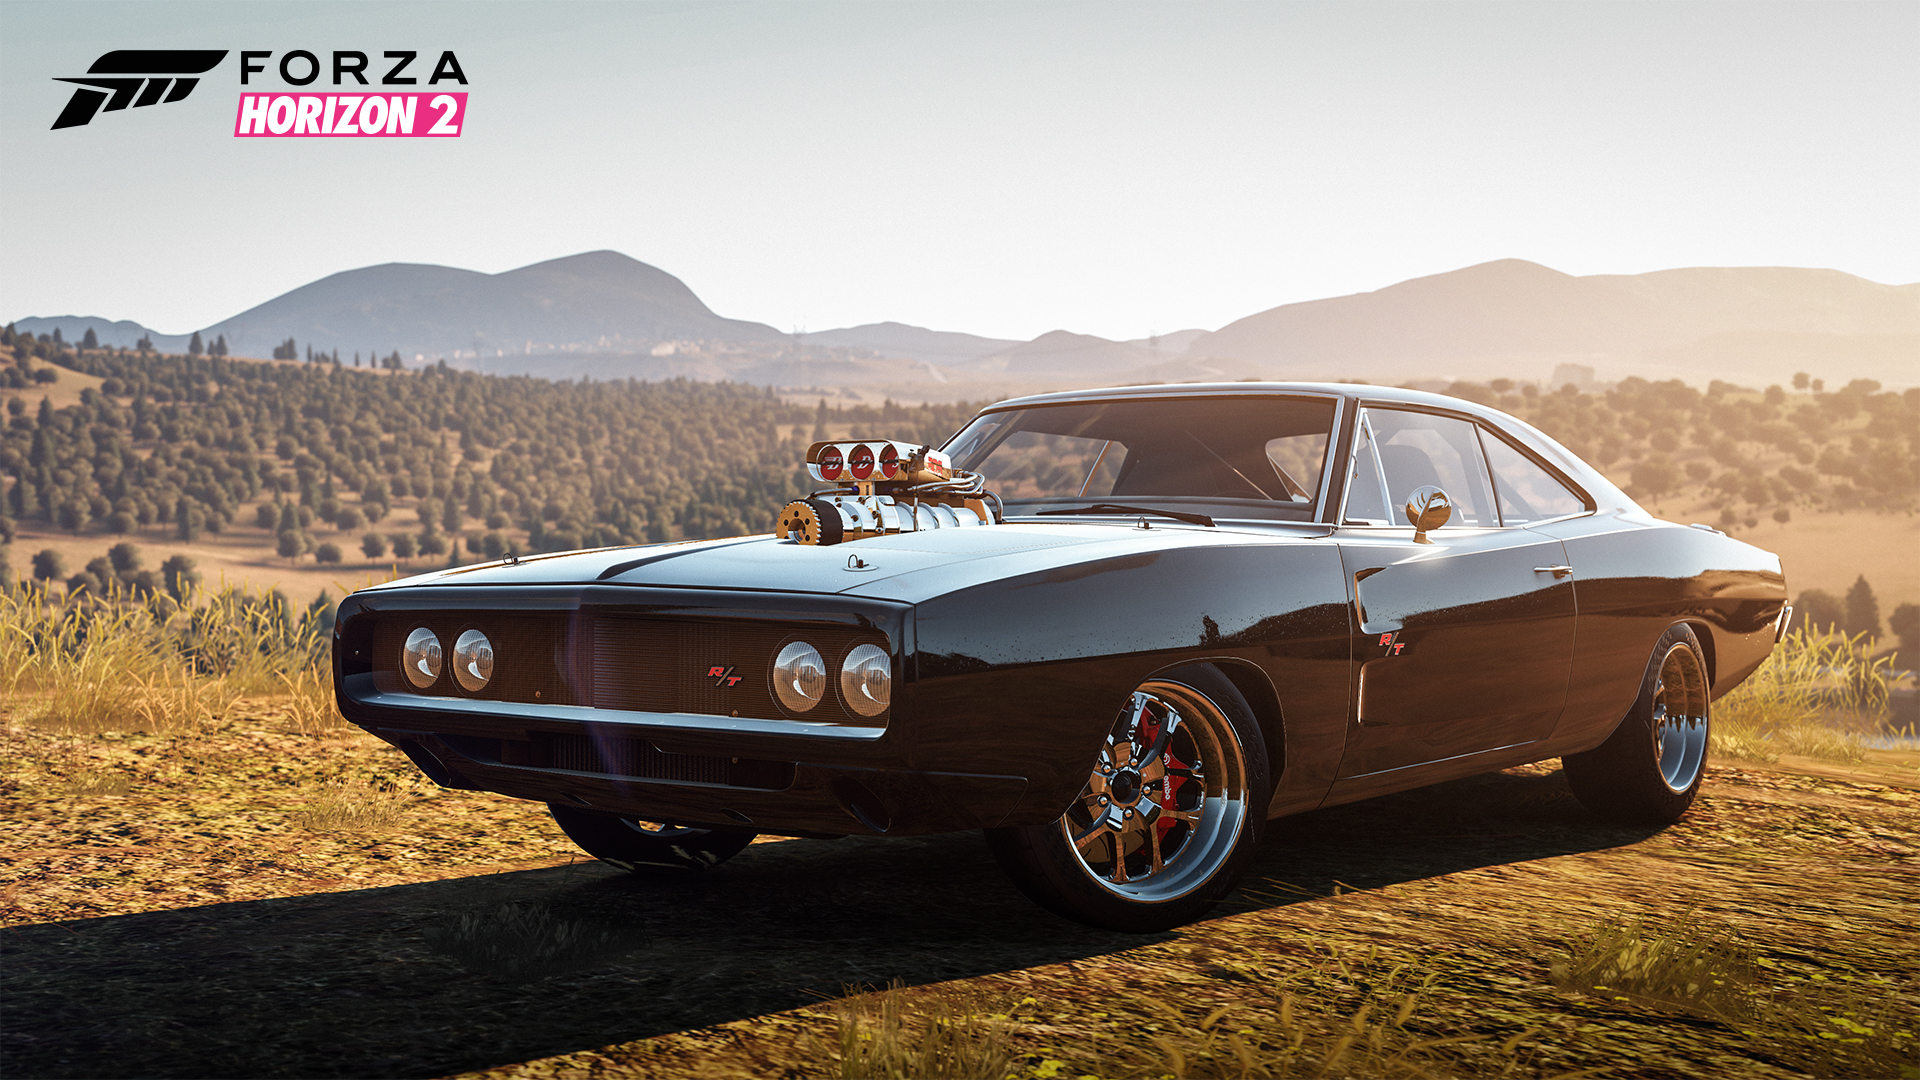 Dodge Charger R/T Fast & Furious Edition (1970) | Forza Wiki | Fandom